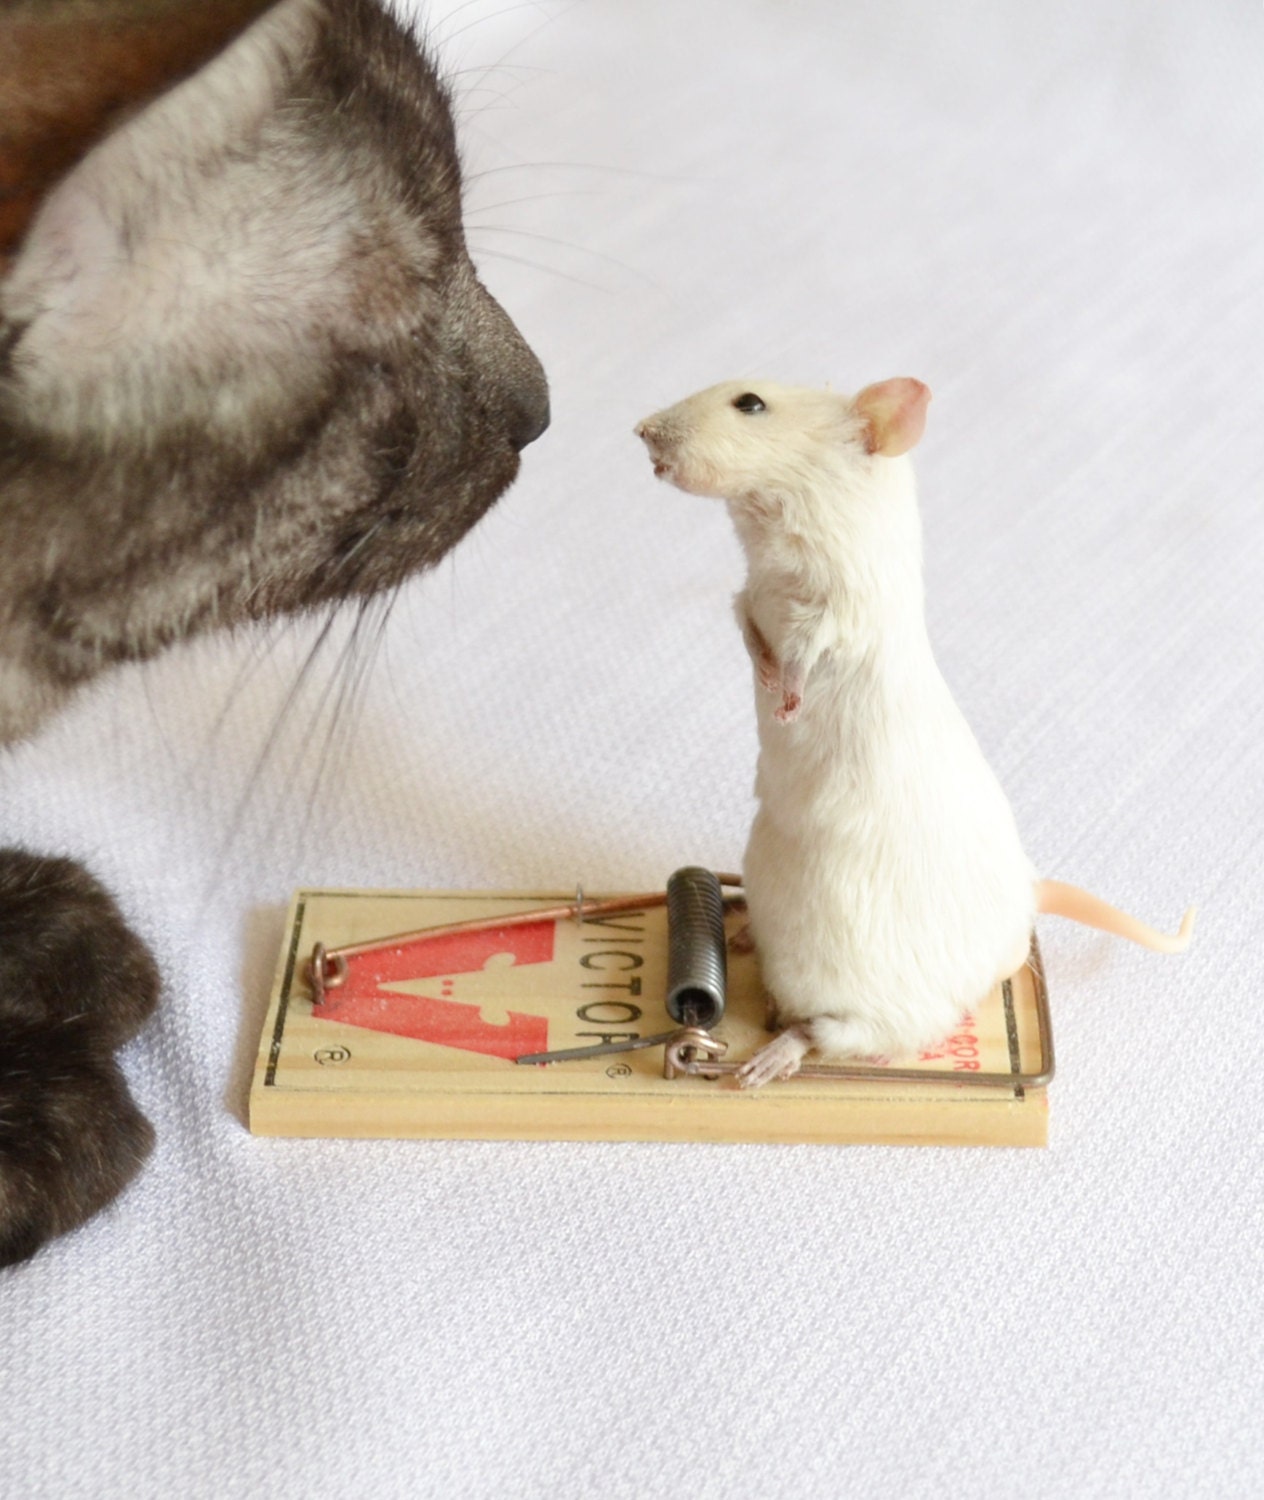 Taxidermy mouse on mouse trap. - NimbleMatters